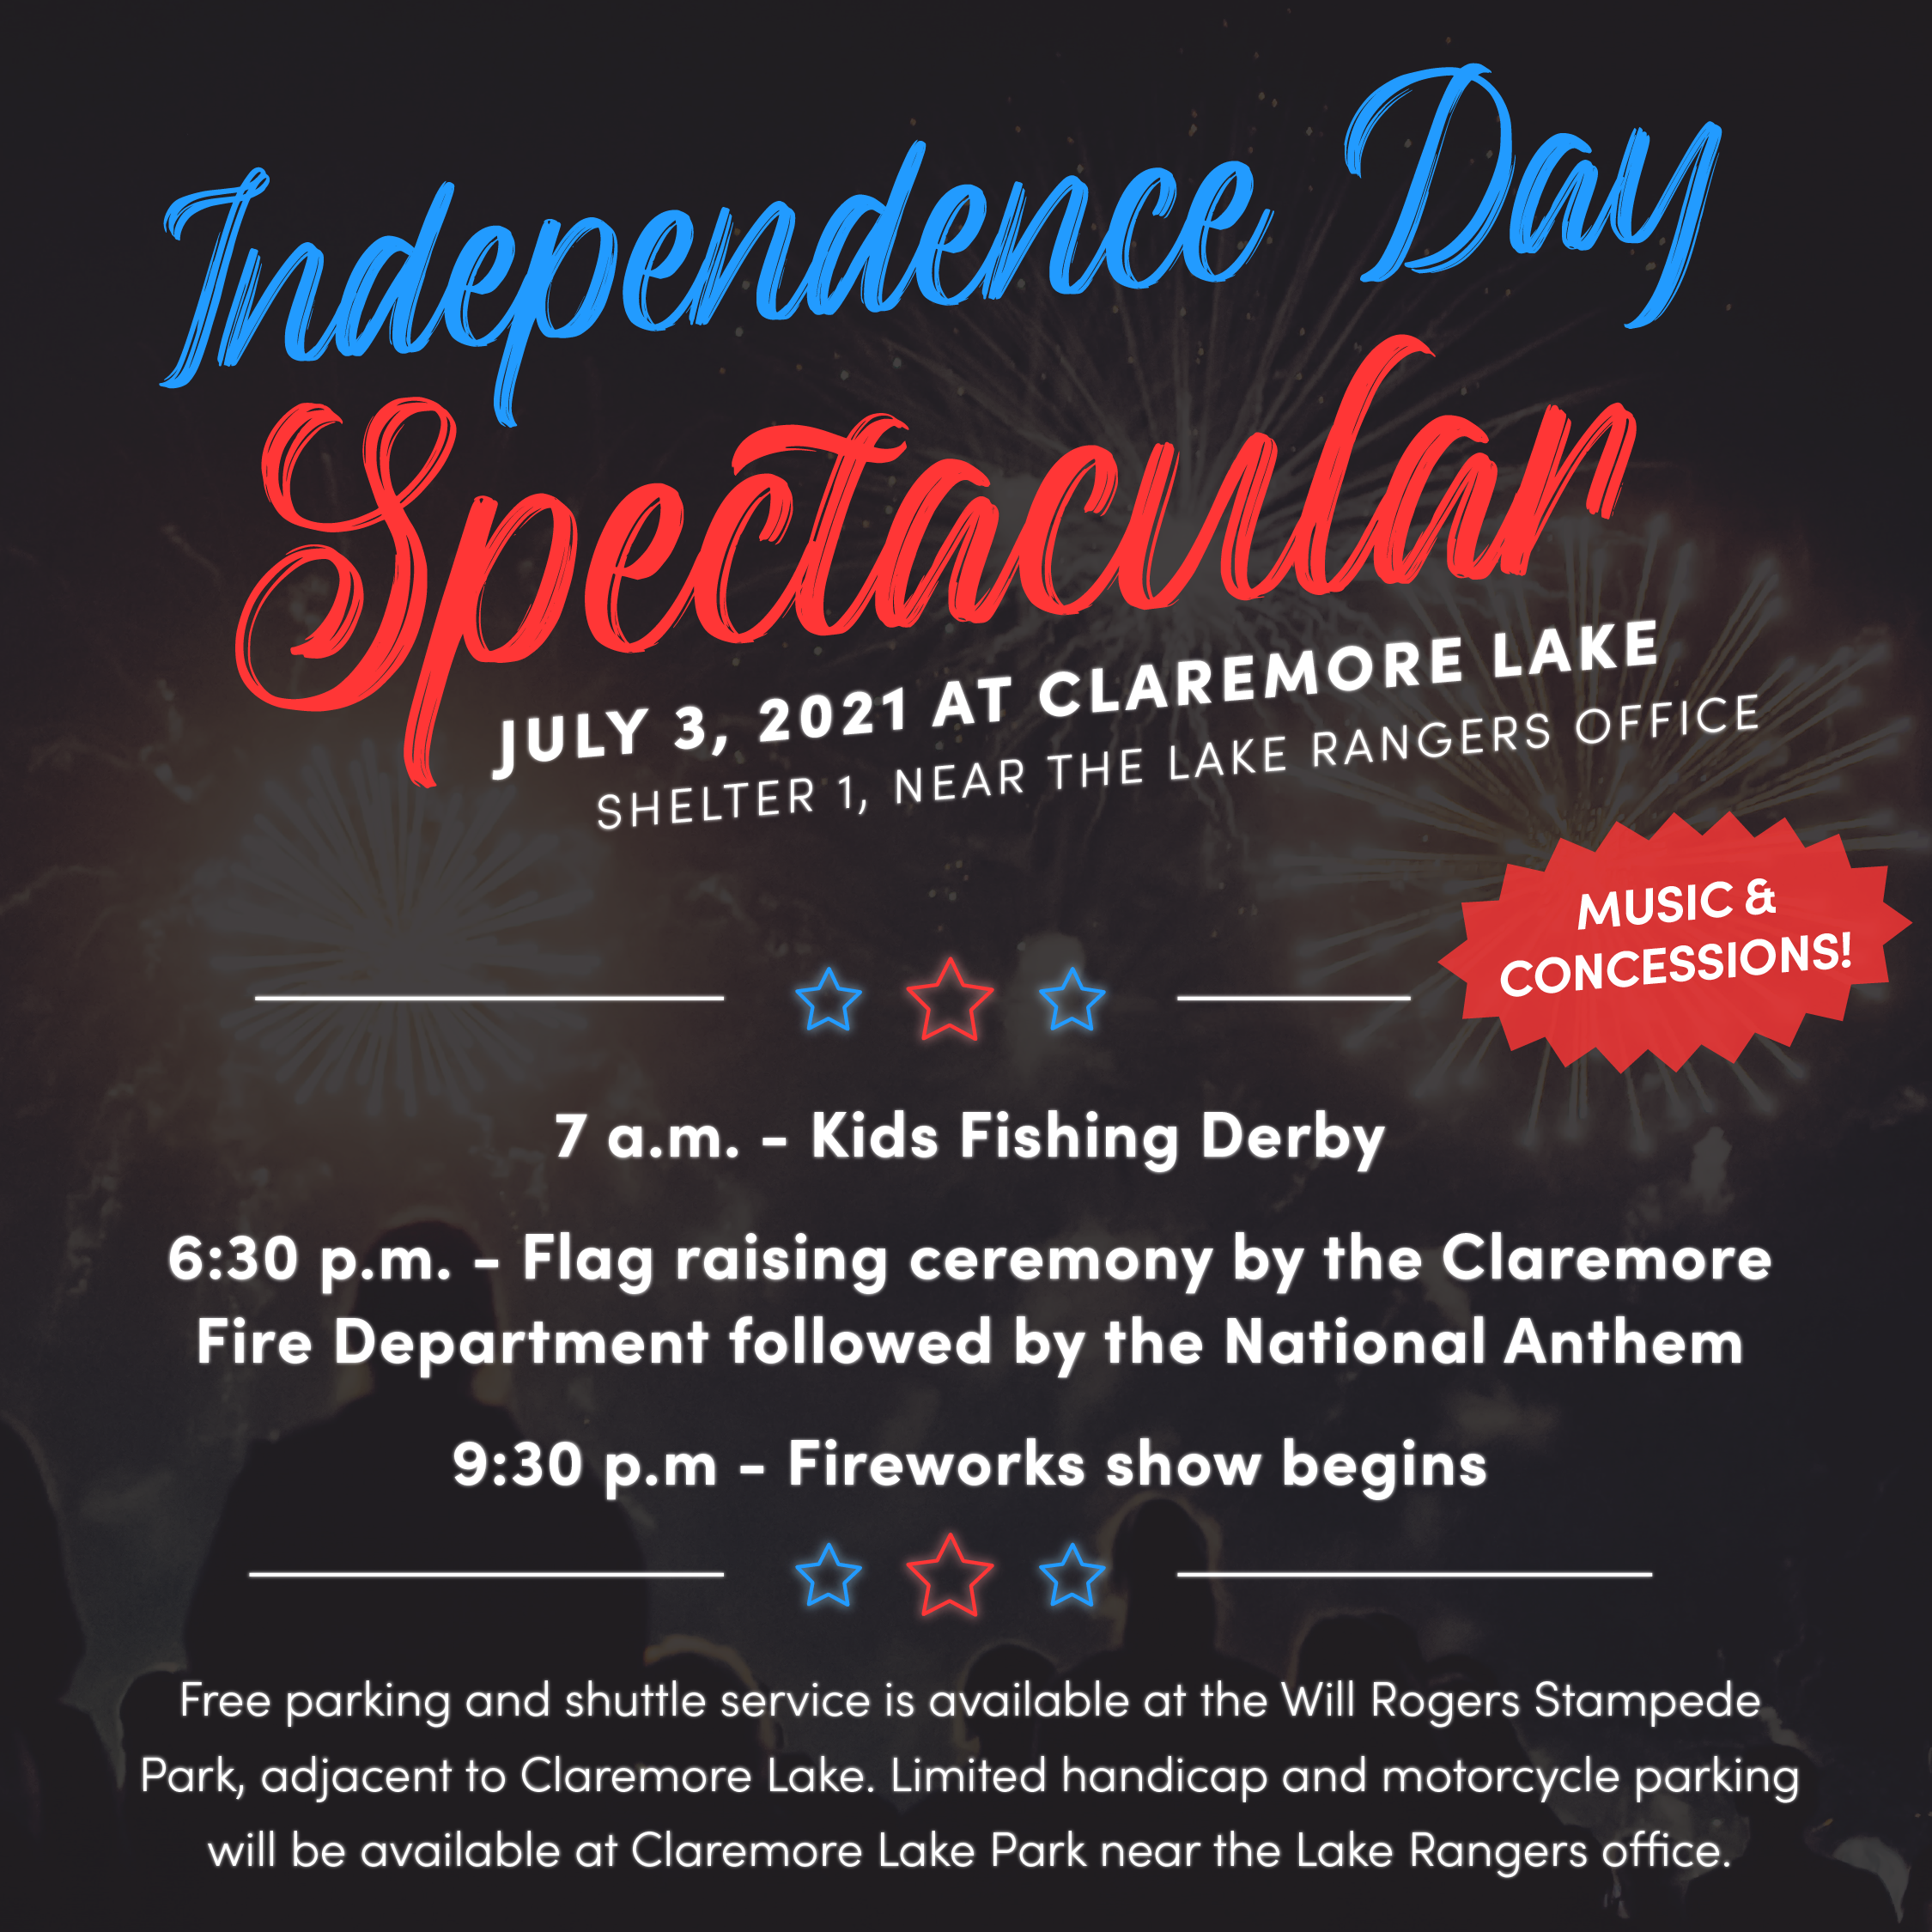 21st Annual Independence Day Spectacular